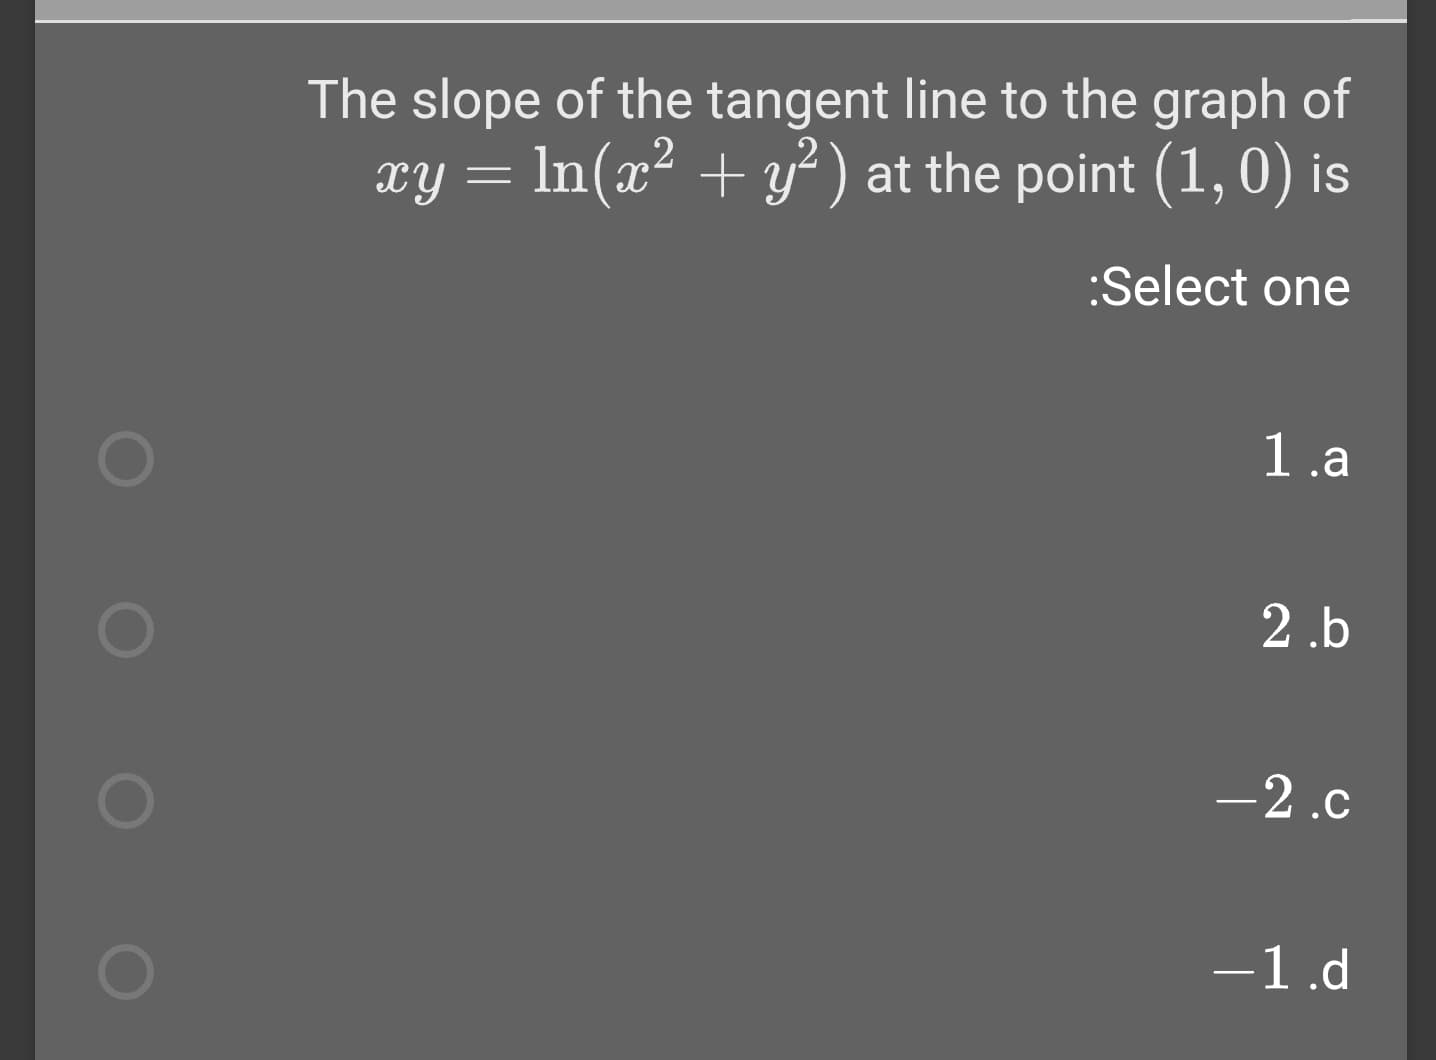 The slope of the tangent line to the graph of
xy = In(x² + y² ) at the point (1,0) is
:Select one
1.a
2.b
-2.c
-1.d
